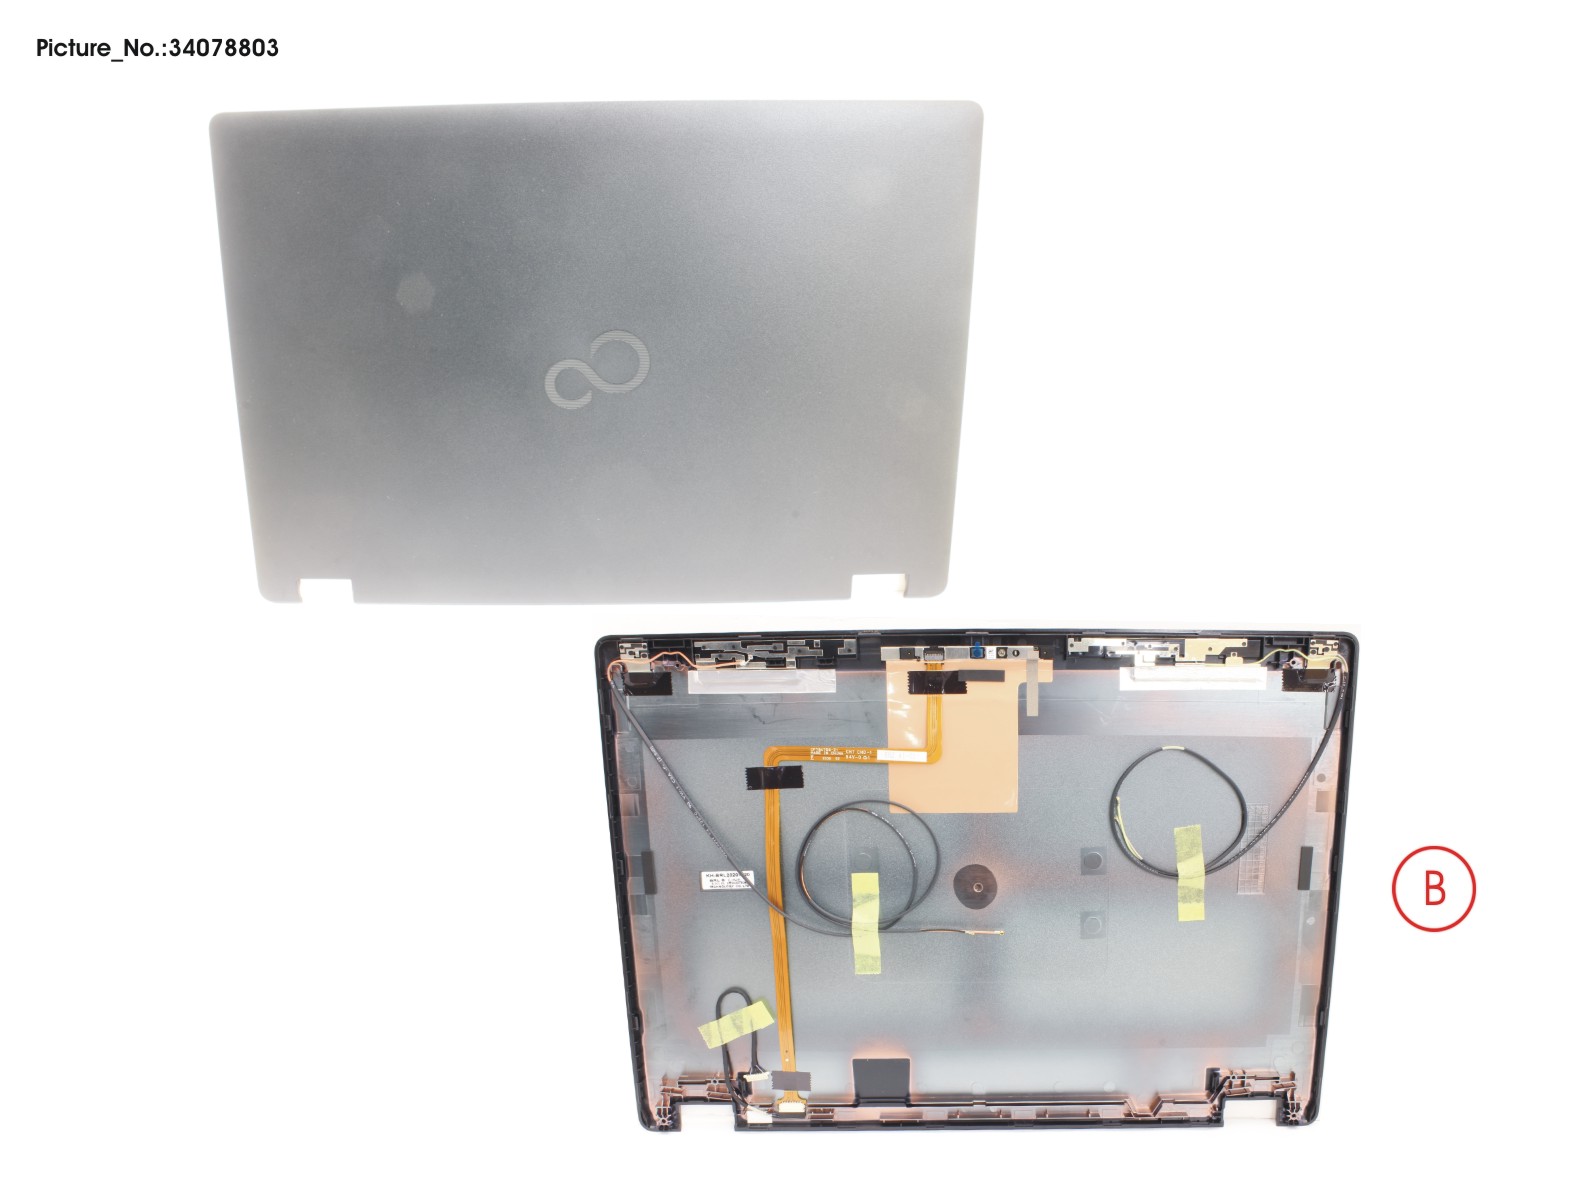 LCD BACK COVER ASSY (W/ TOUCH W/ HELLO)